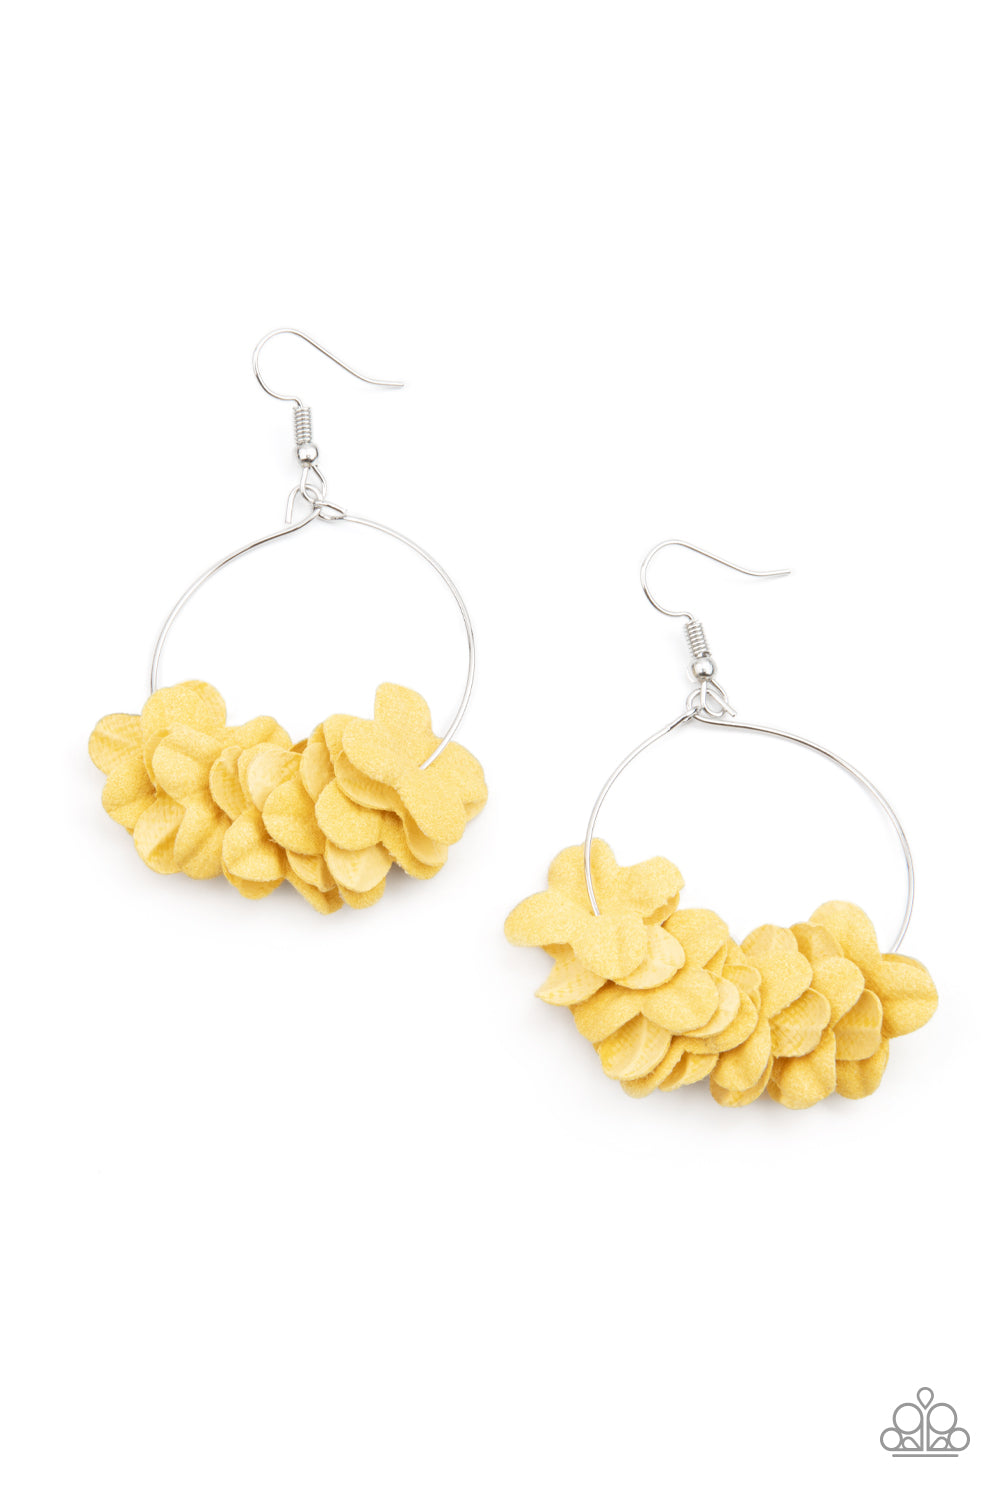 Yellow earrings with a flirty swag, soft pedals dance at the bottom of the hoop. Lead free and nickel free $5 earrings.